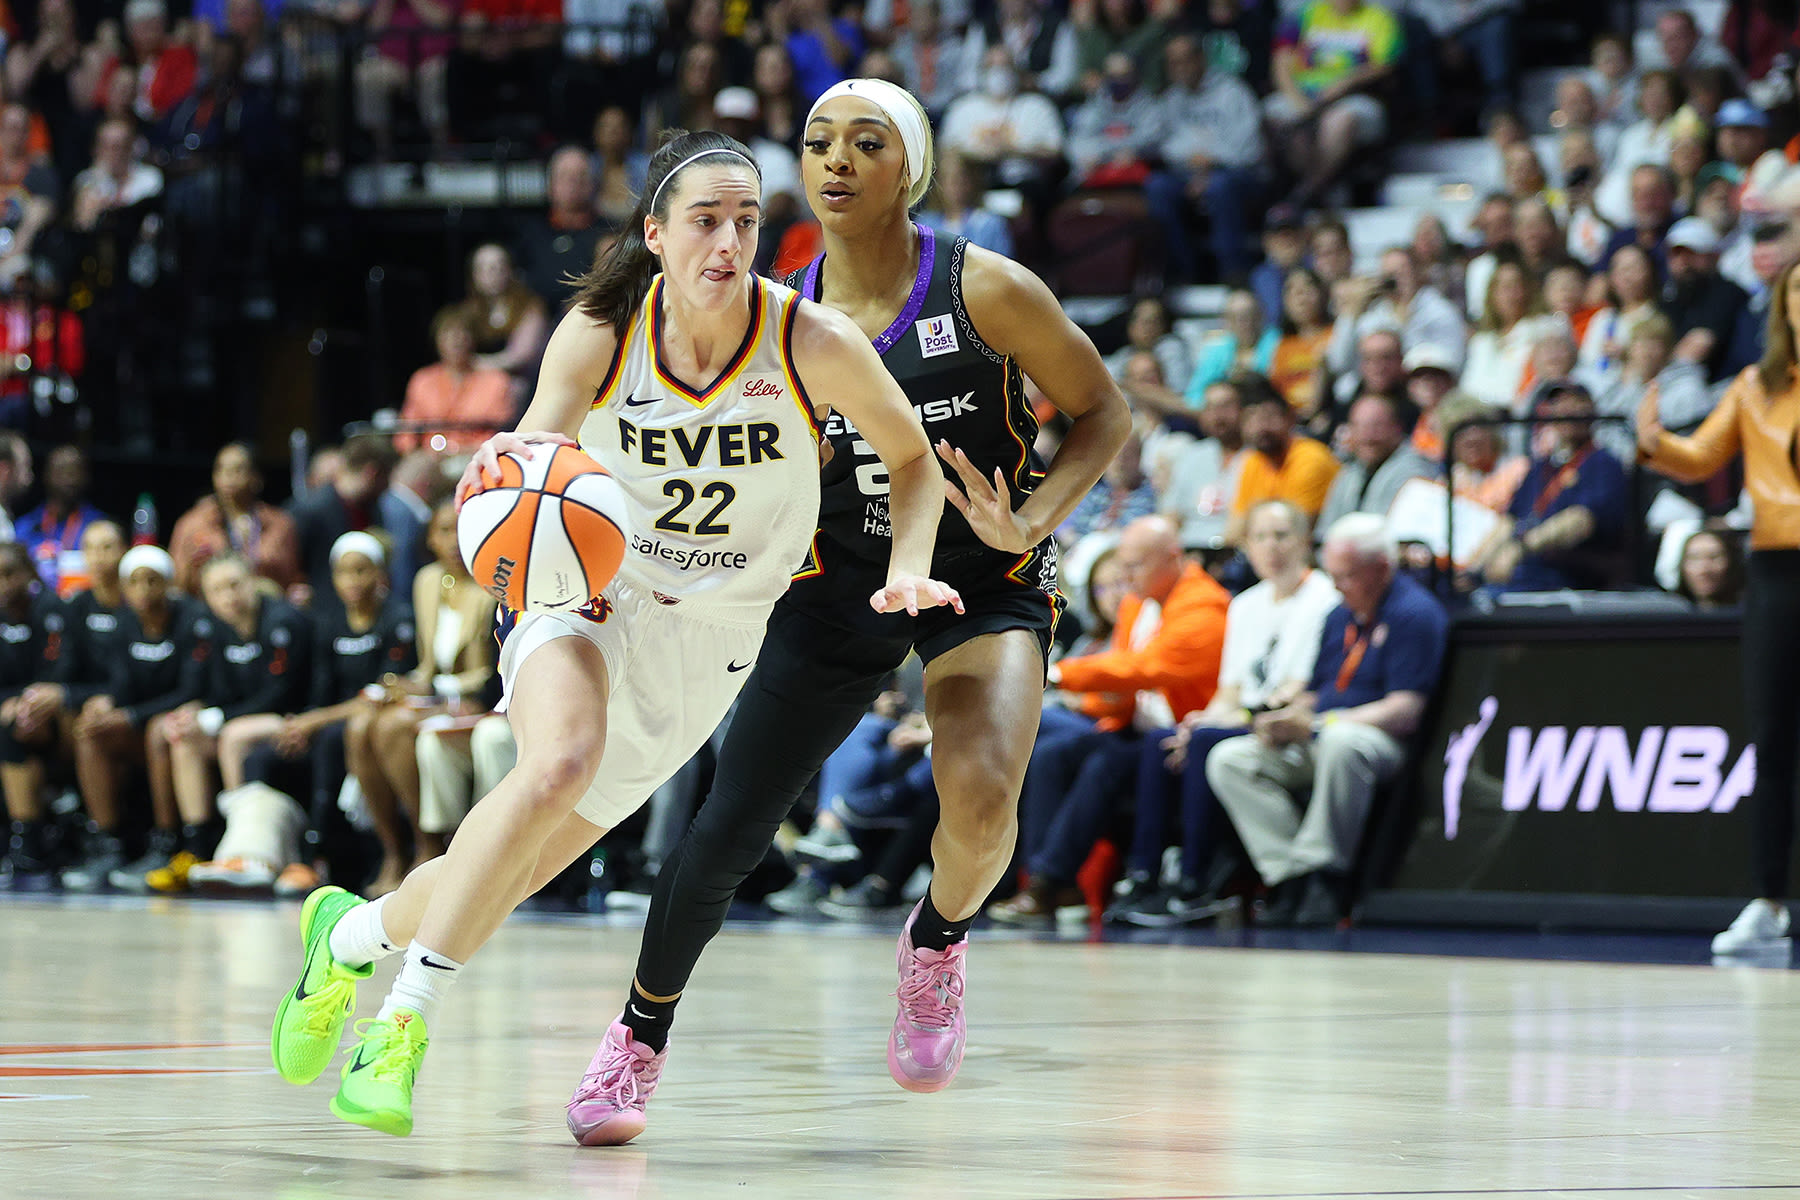 Indiana Fever vs. New York Liberty: How to Watch the WNBA Game Online